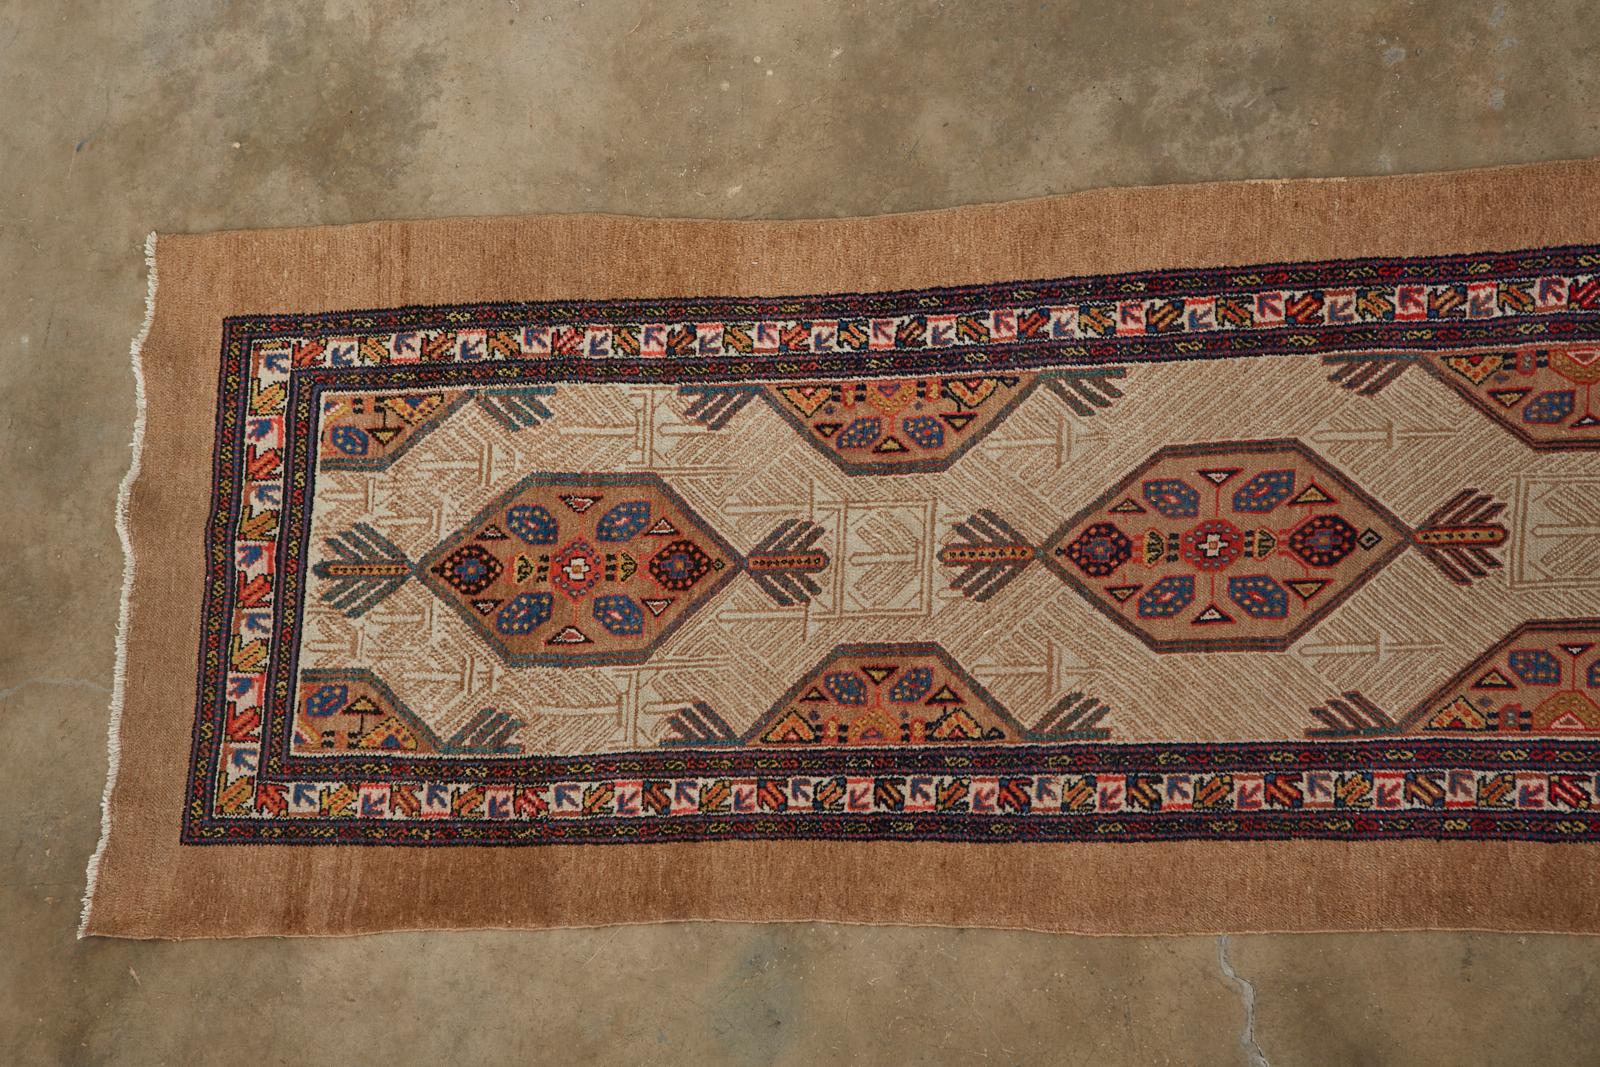 Long vintage Persian camel hair Sarab hallway runner over 20 feet in length. Features a traditional tribal style design with six cartouche shaped medallions over a cream colored center field. Handwoven with soft camel hair colored with natural dyes.